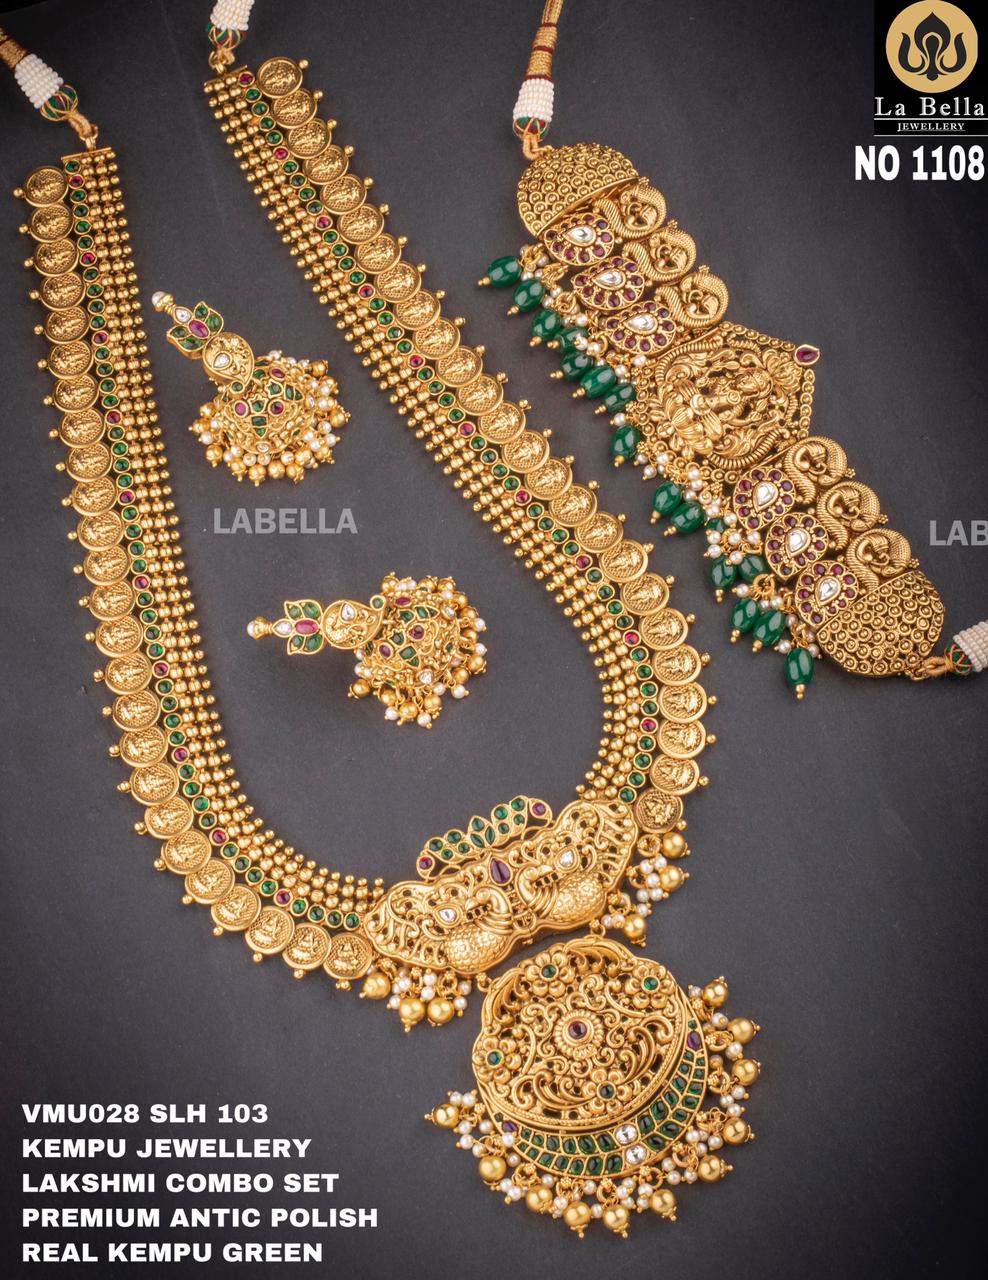 Bridal Kempu Jewelry Collection April 2021 - Indian Jewelry Designs